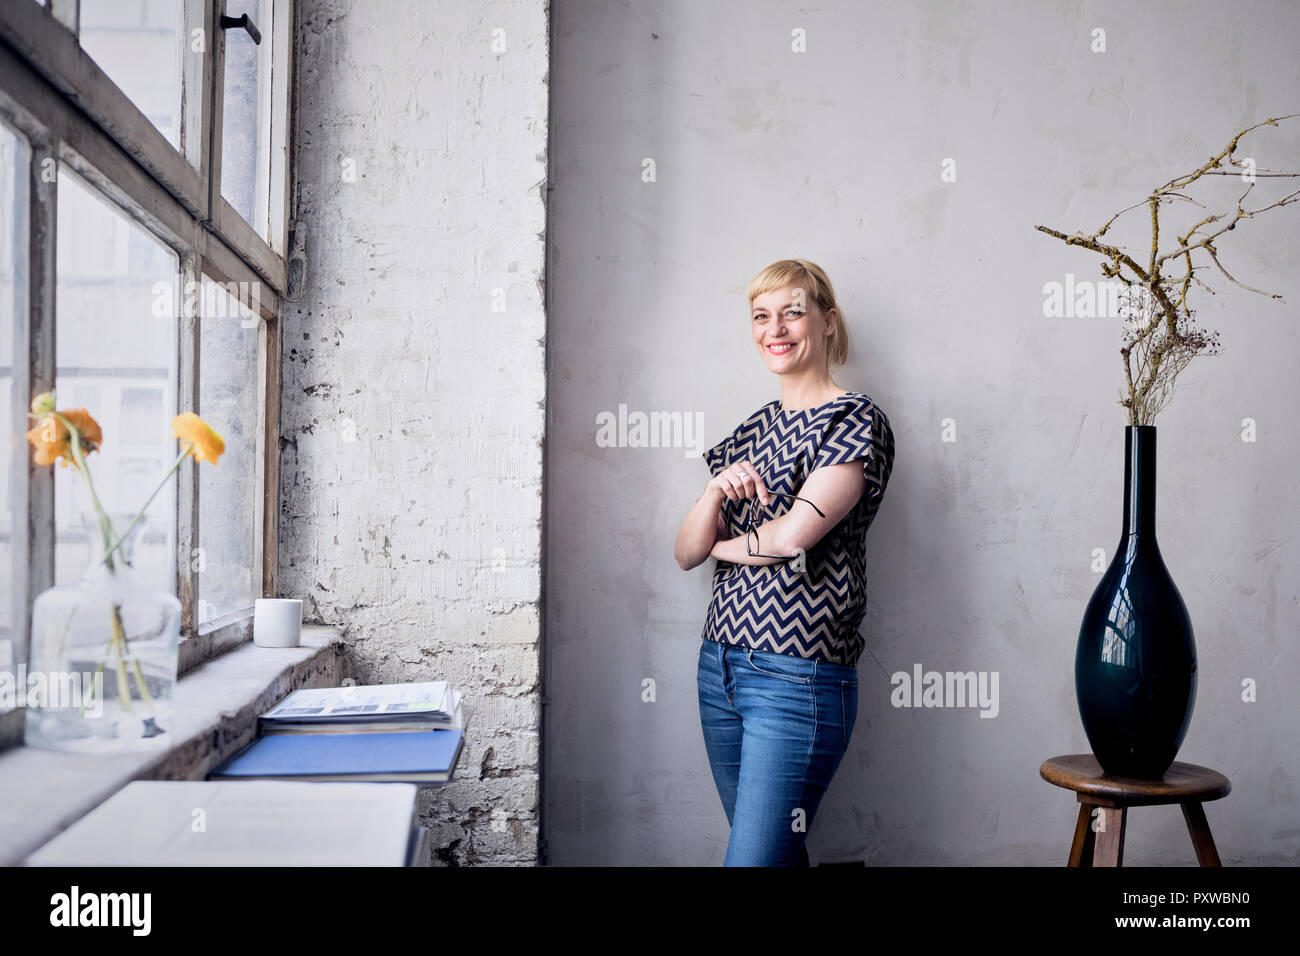 Portrait of laughing woman leaning against wall in loft Stock Photo